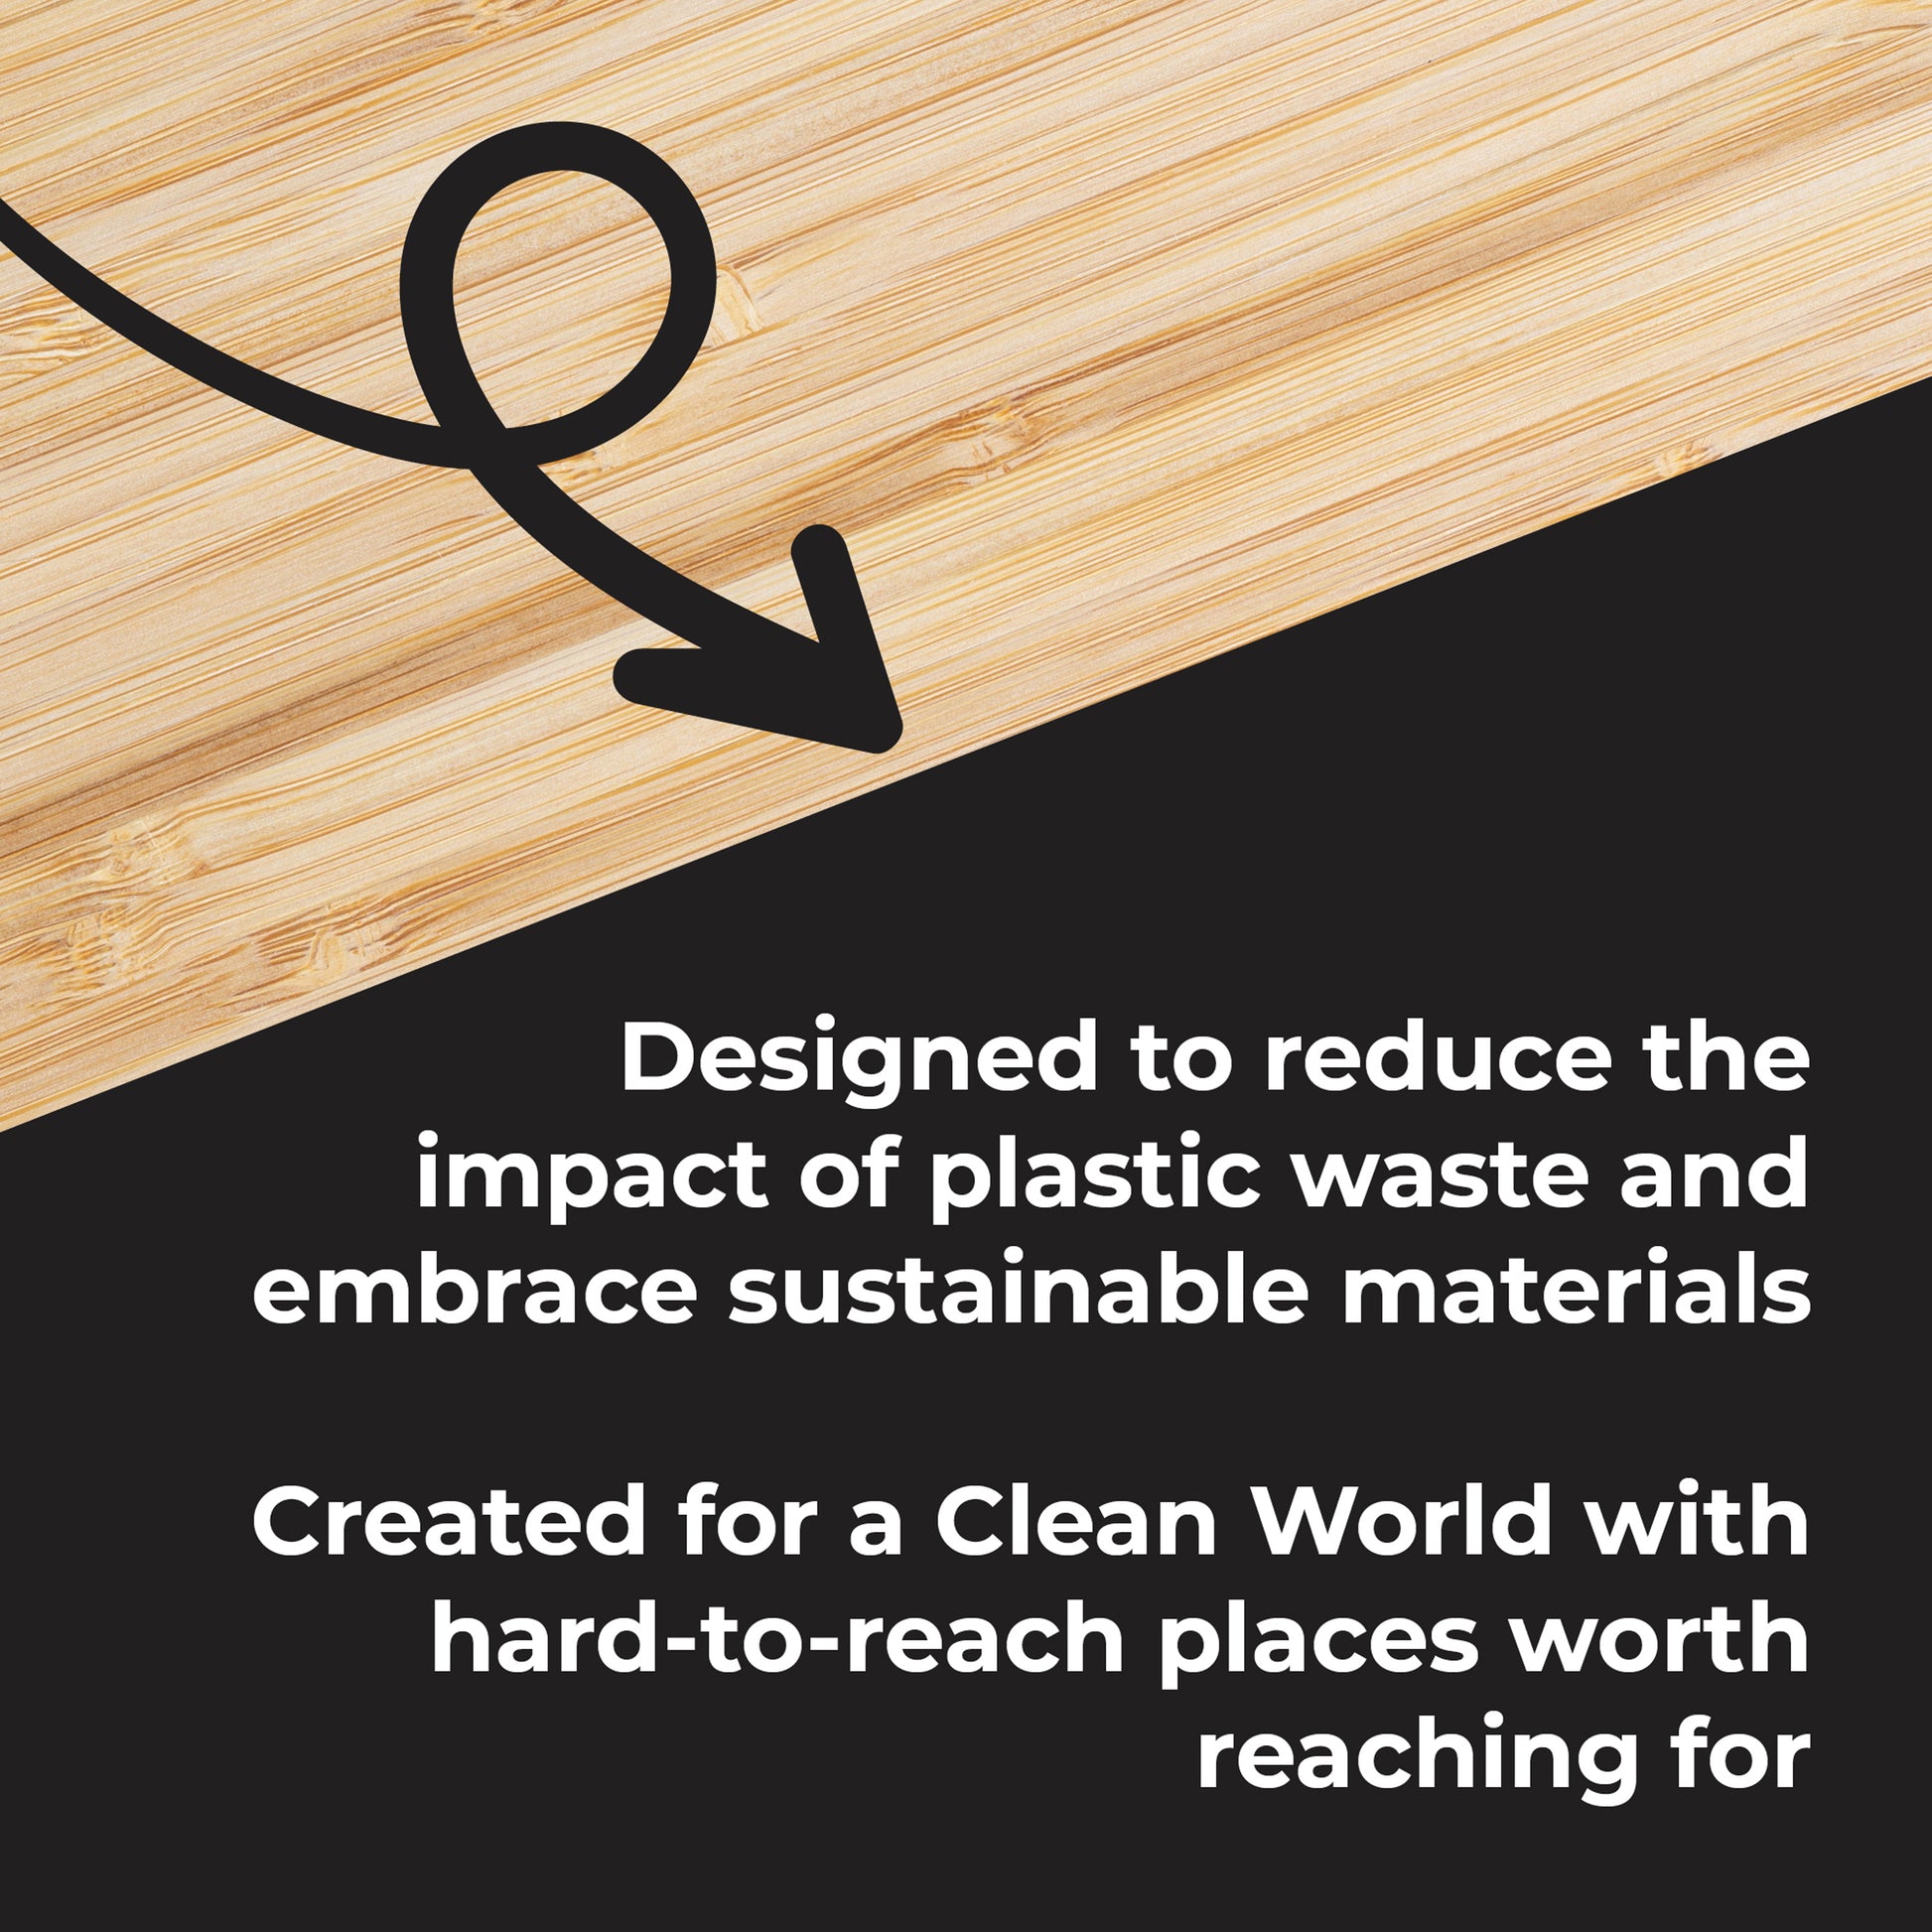 Designed to reduce the impact of plastic waste and embrace sustainable materials. Created for a clean world with hard-to-reach places worth reaching for